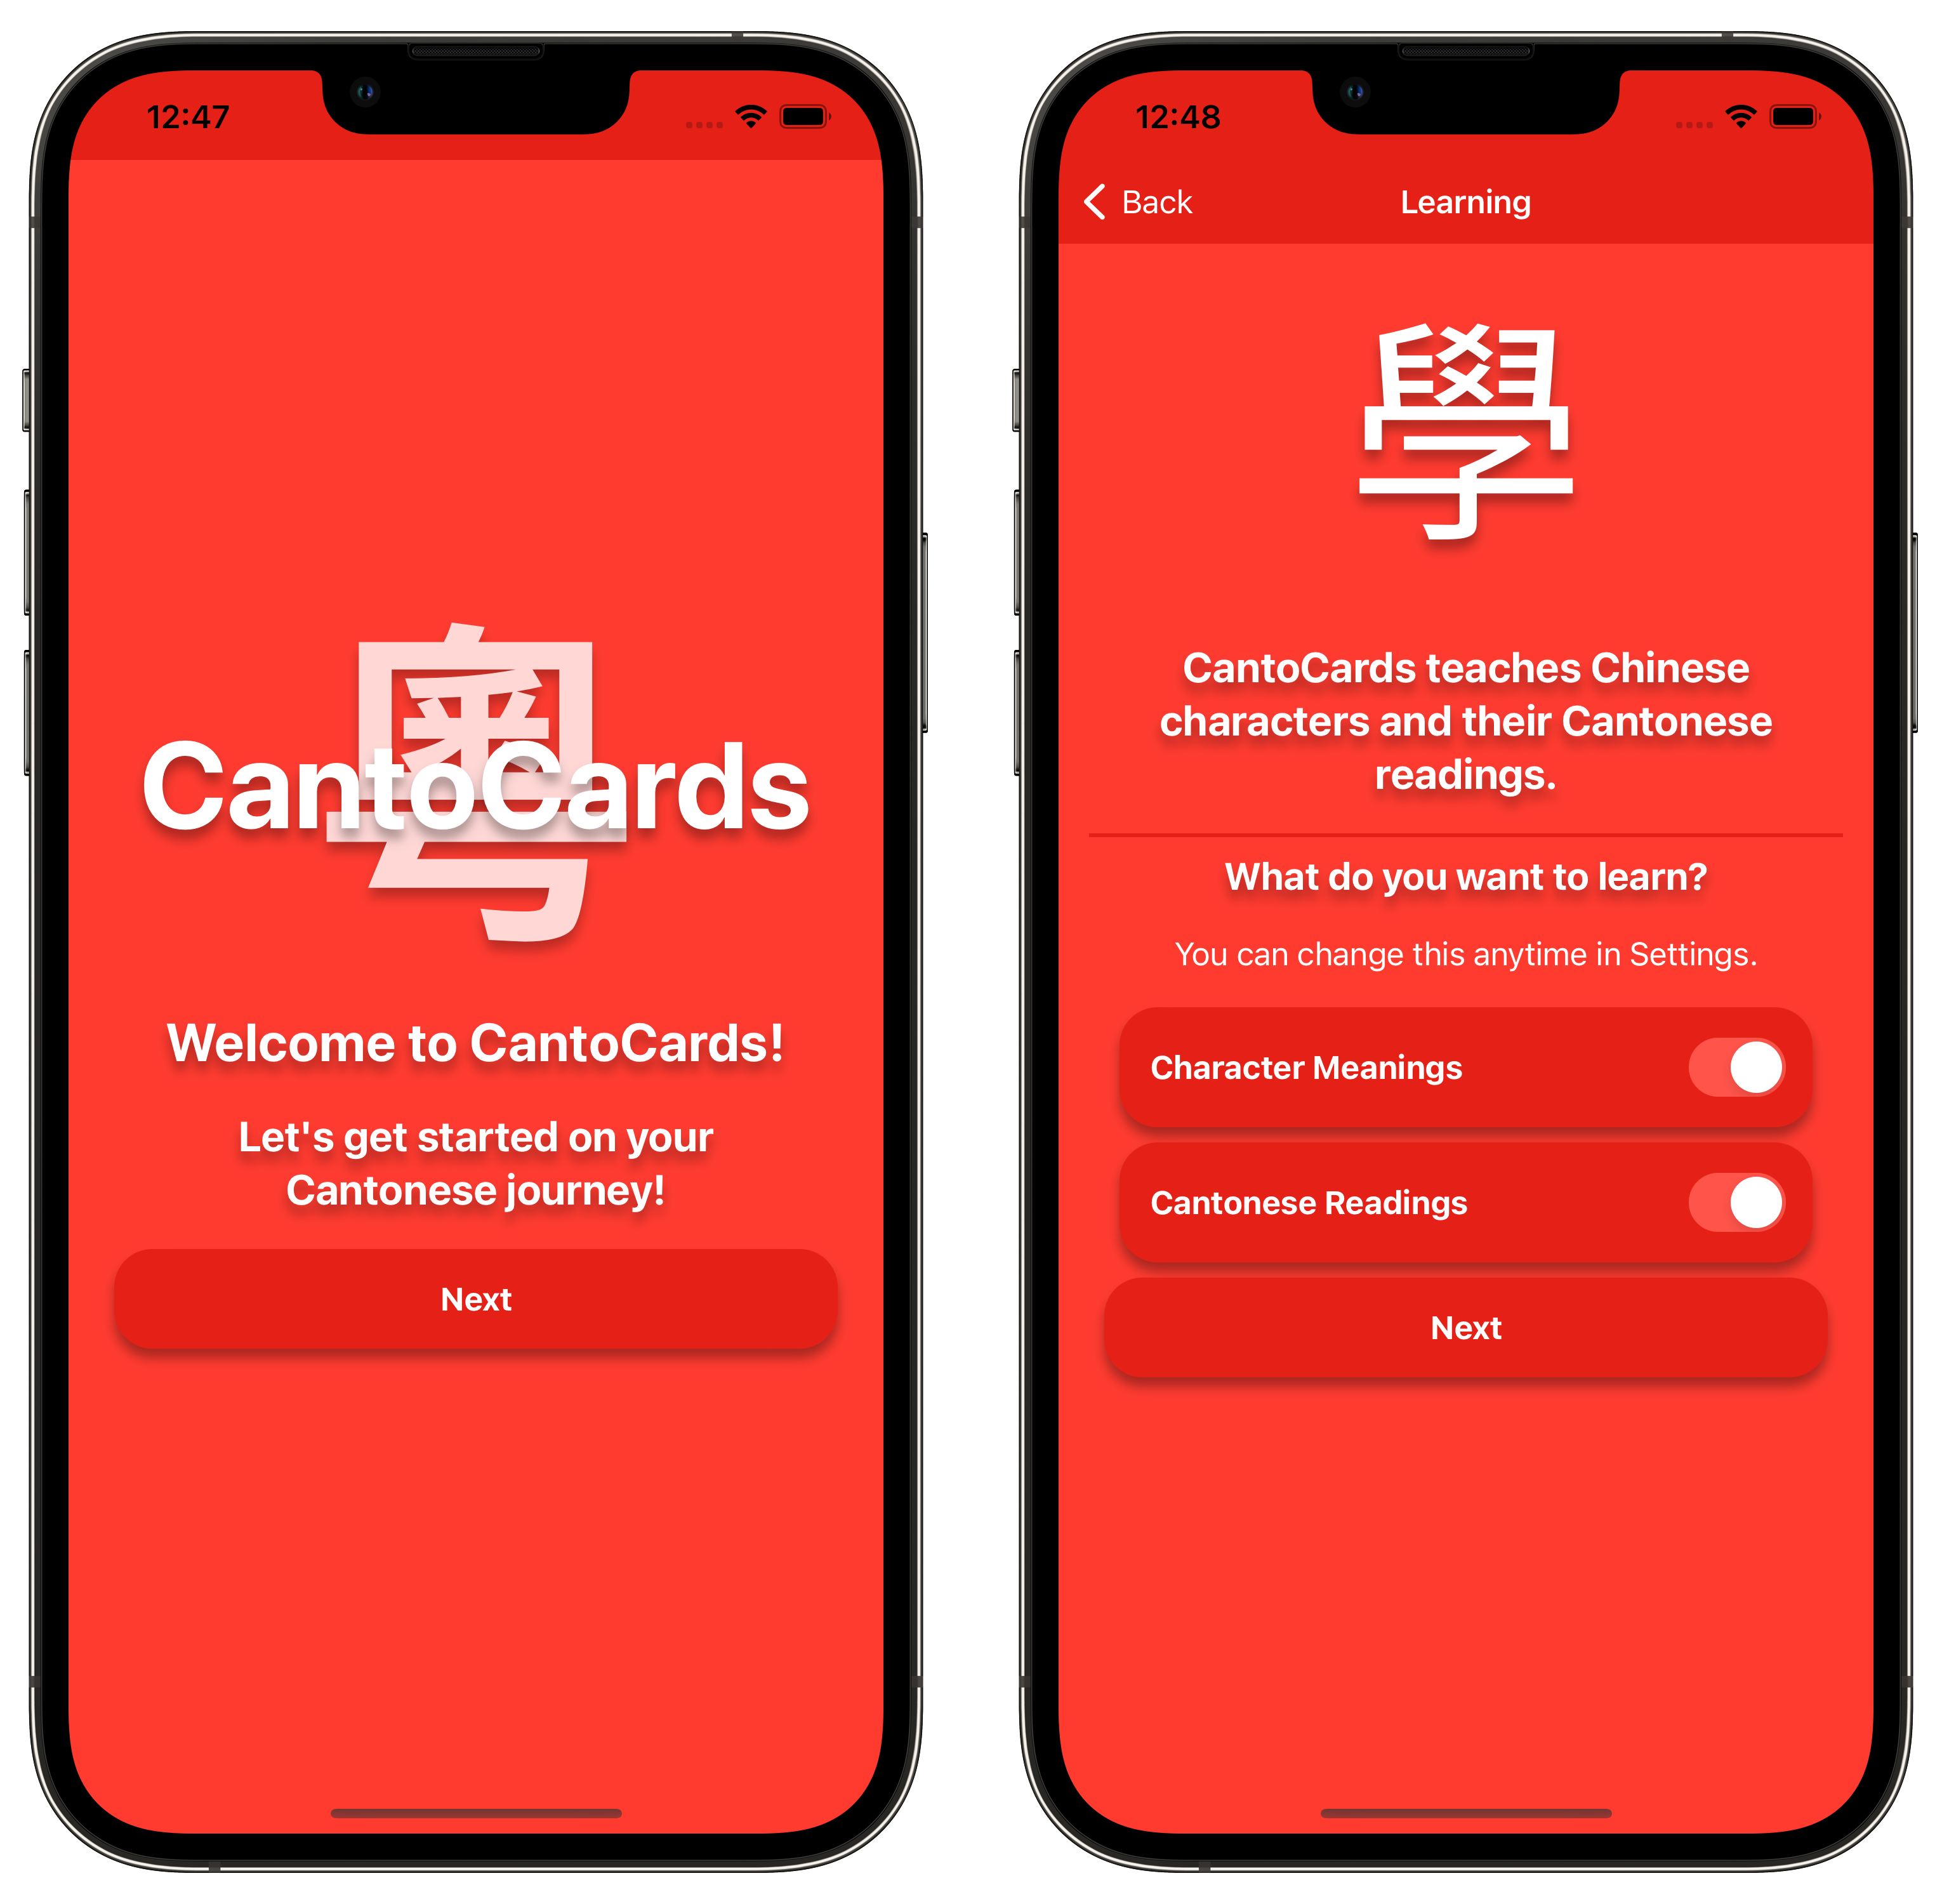 Welcome to CantoCards